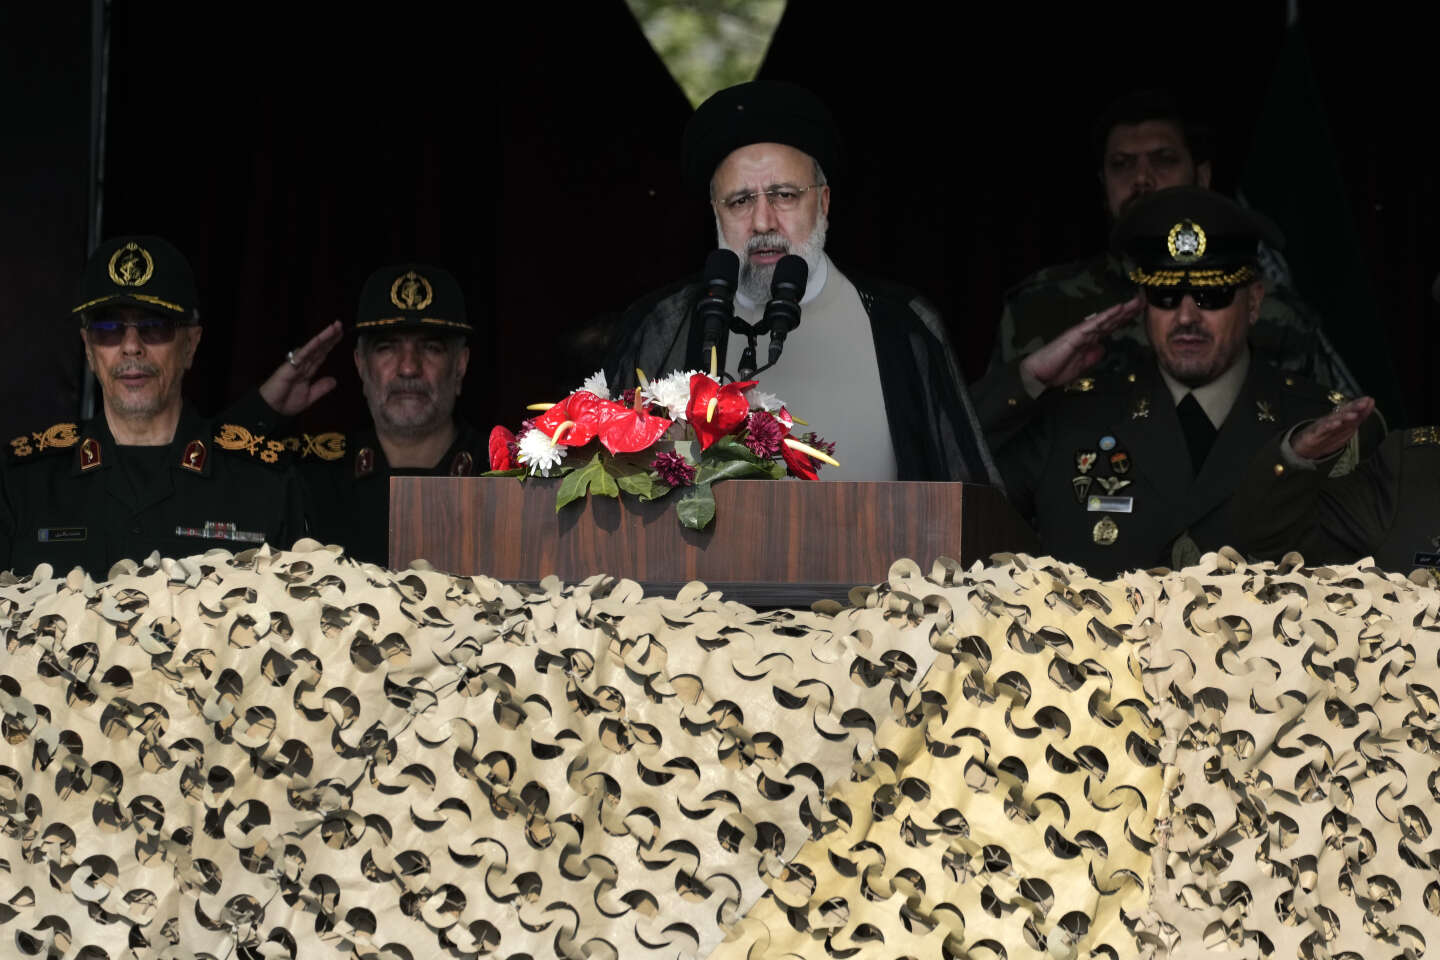 Iran's attack against Israel shows Revolutionary Guards are toughening their stance